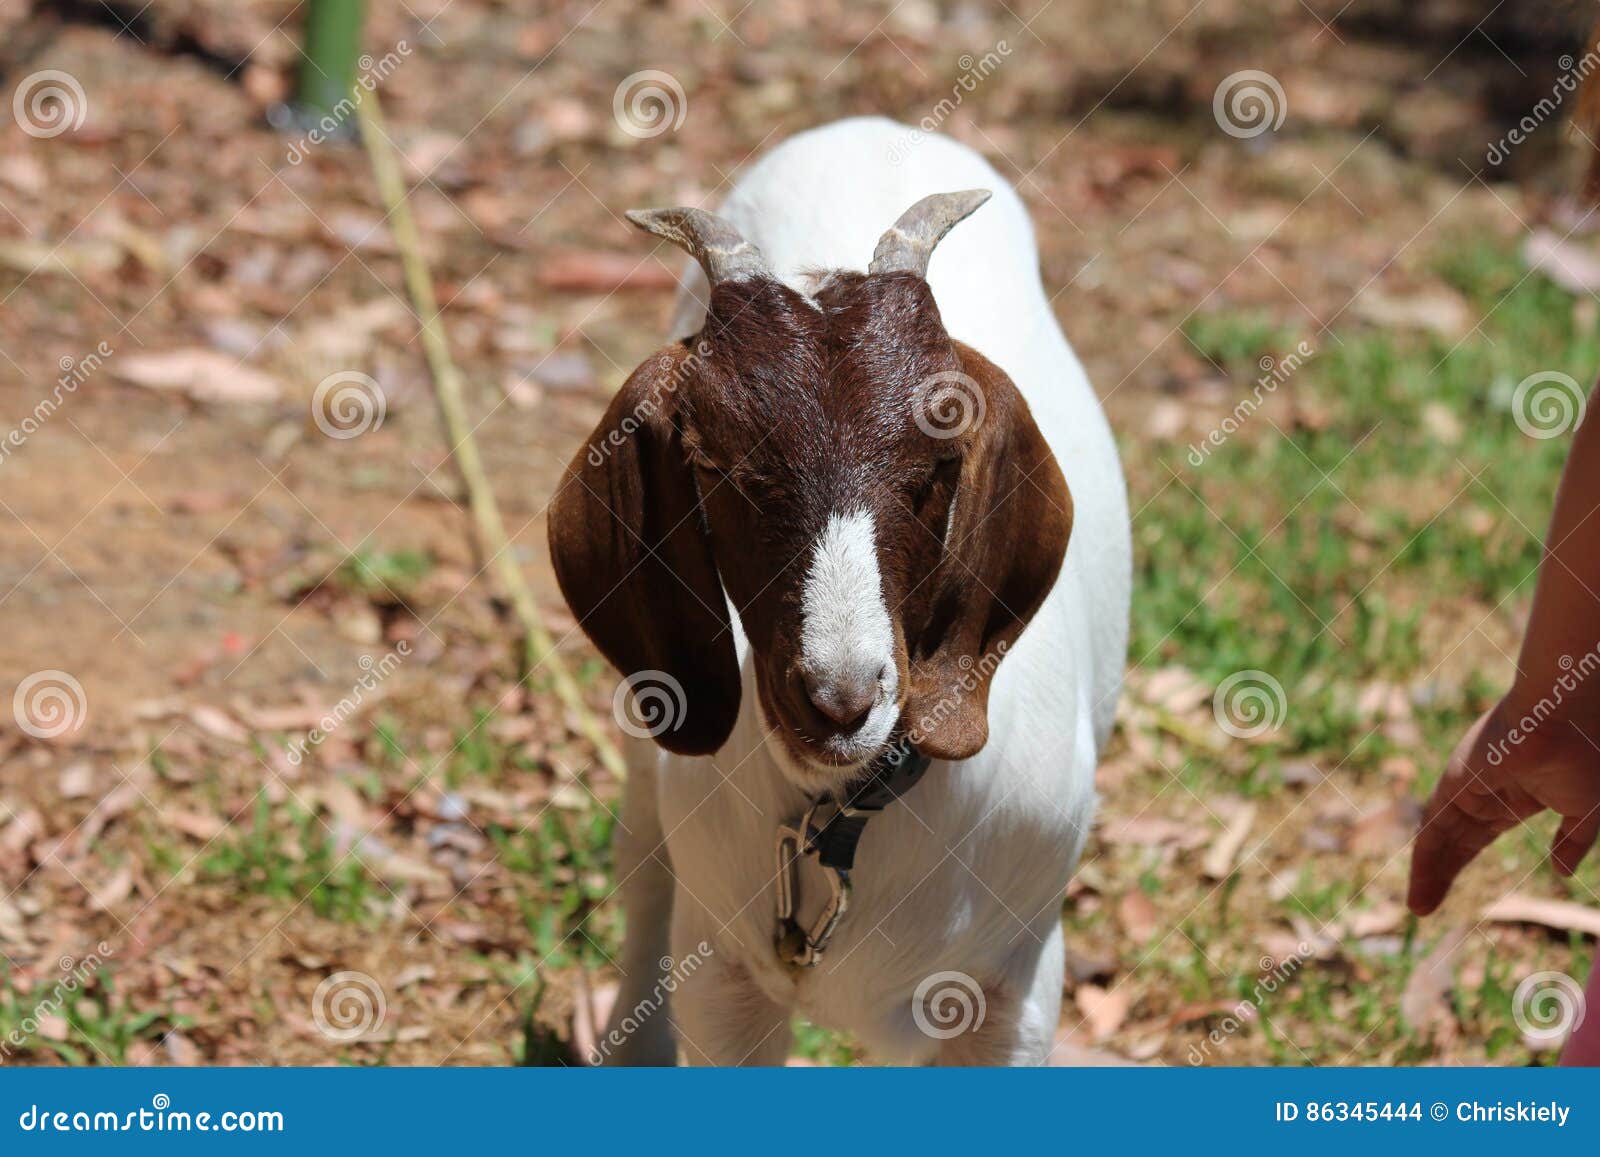 Pet Brown White Goat stock photo. Image of house, easy - 86345444